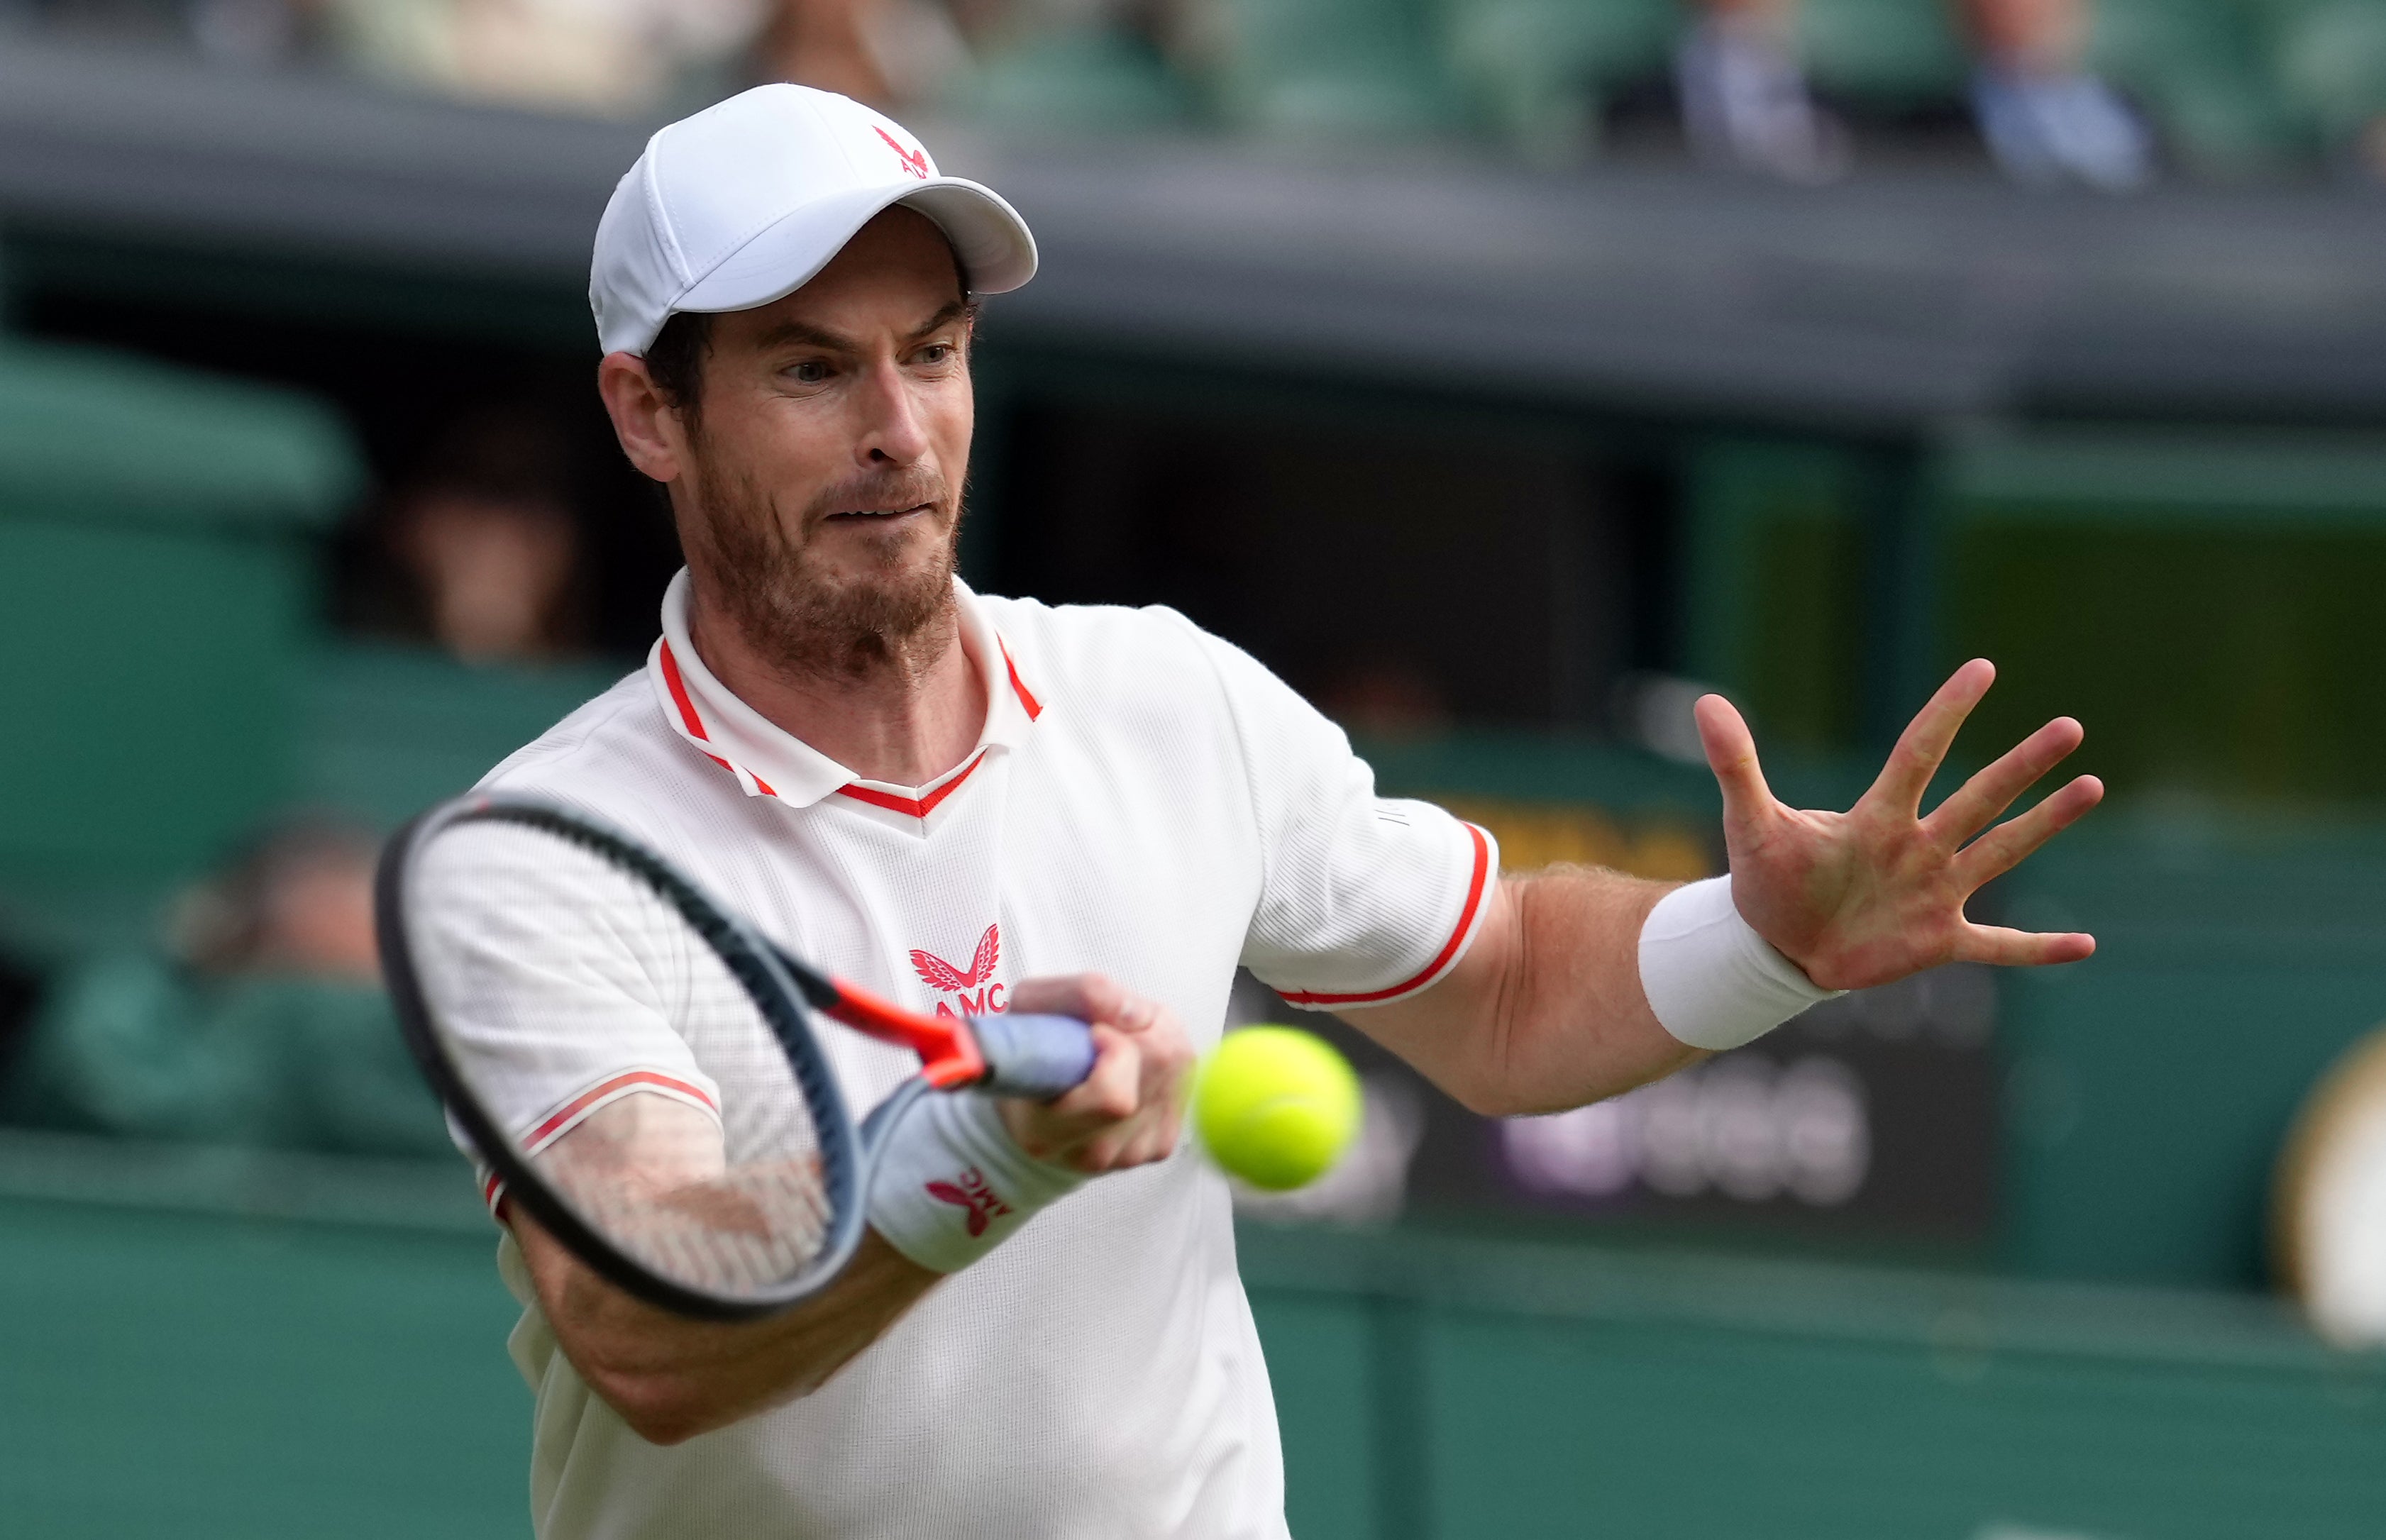 Andy Murray will take on German qualifier Oscar Otte in the second round